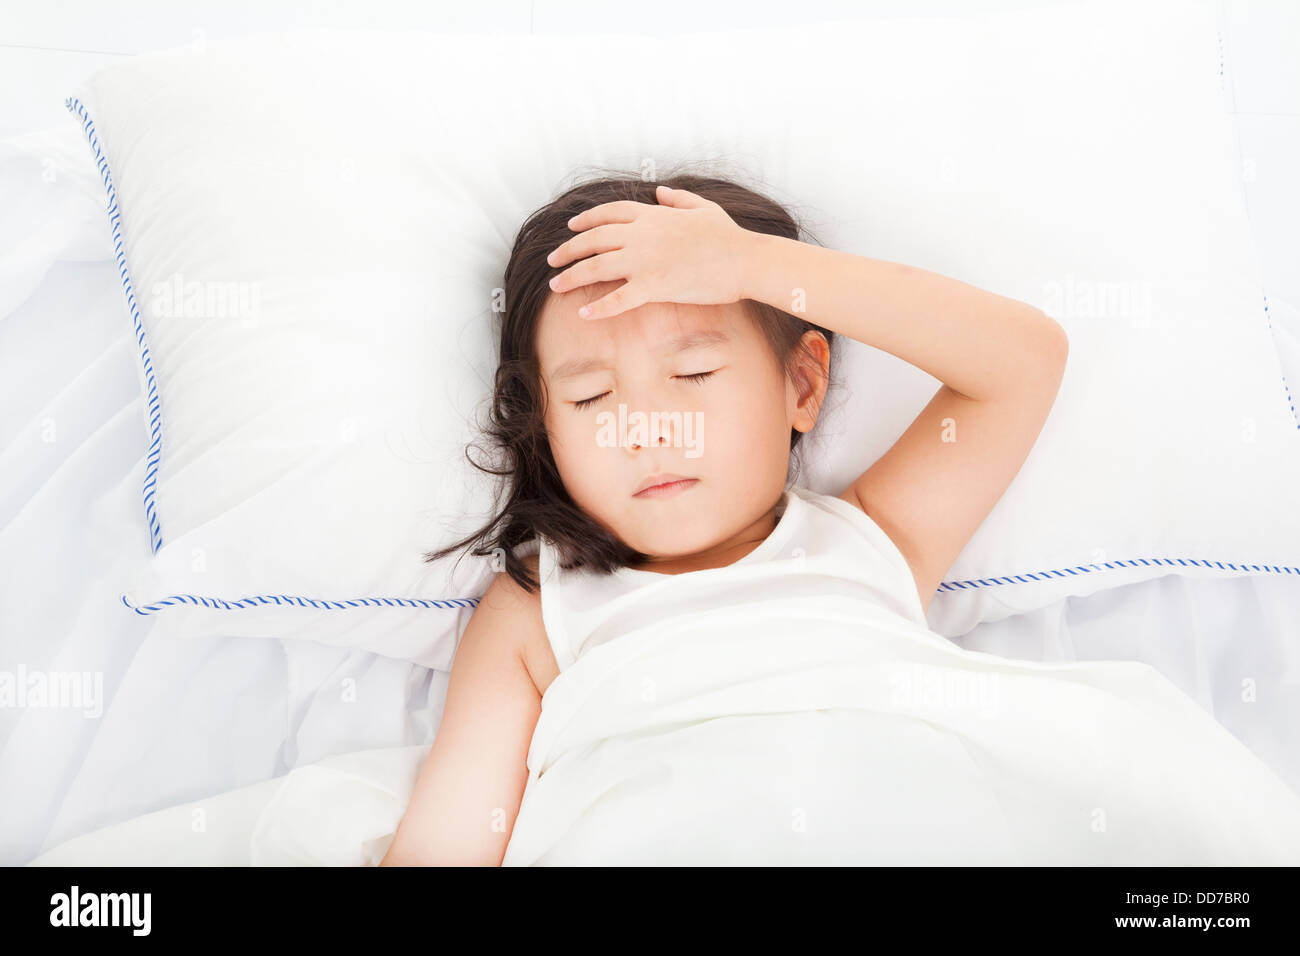 Little girl with illness on the bed Stock Photo